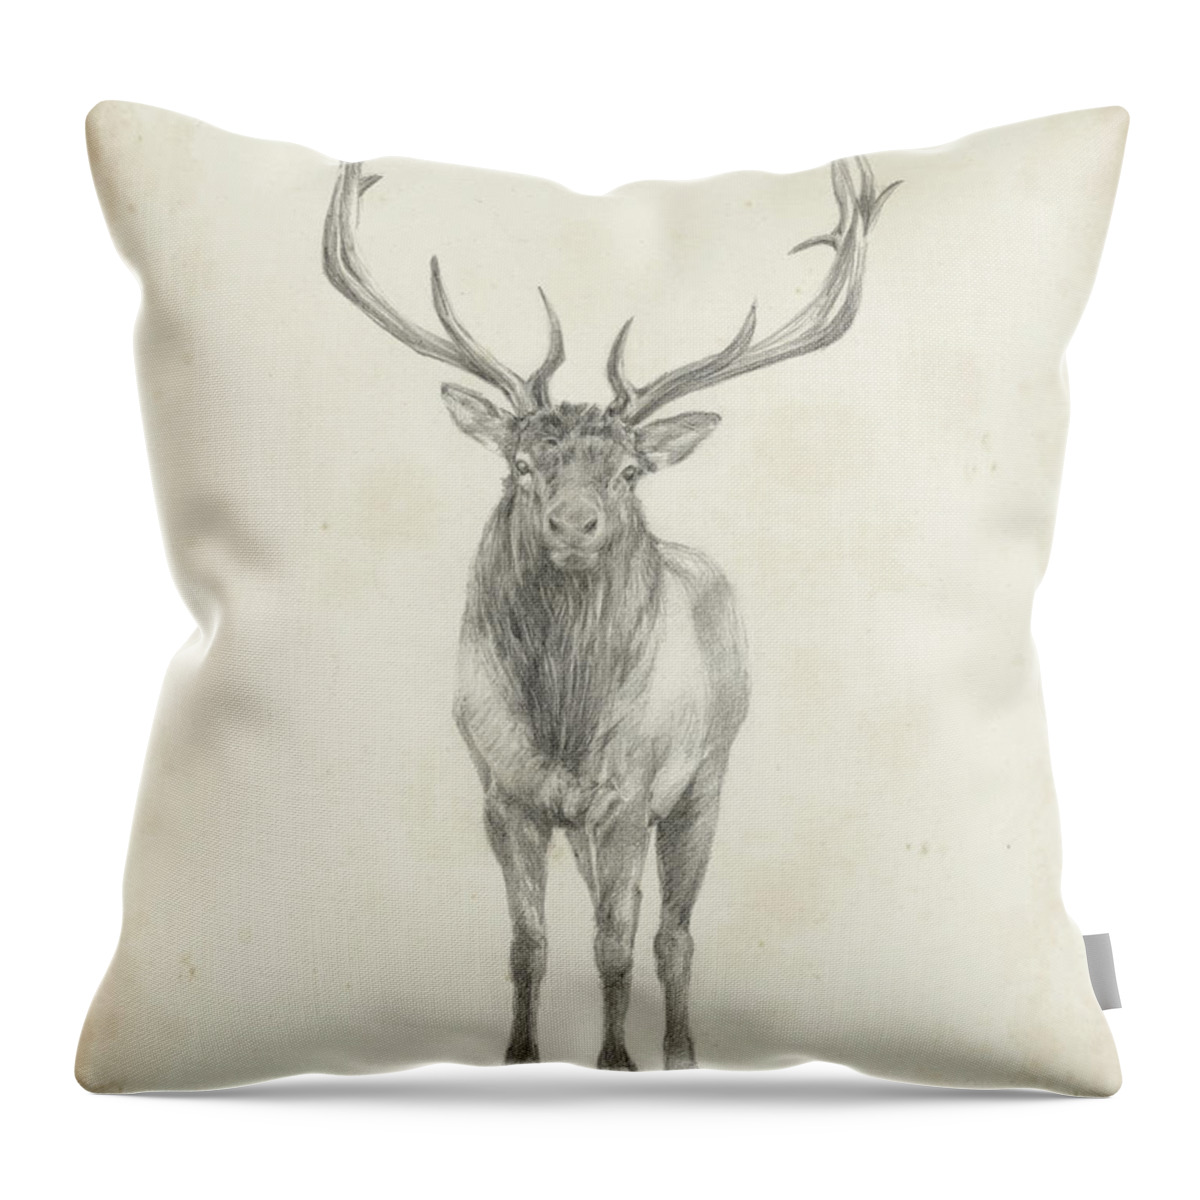 Animals Throw Pillow featuring the painting Elk Study by Ethan Harper